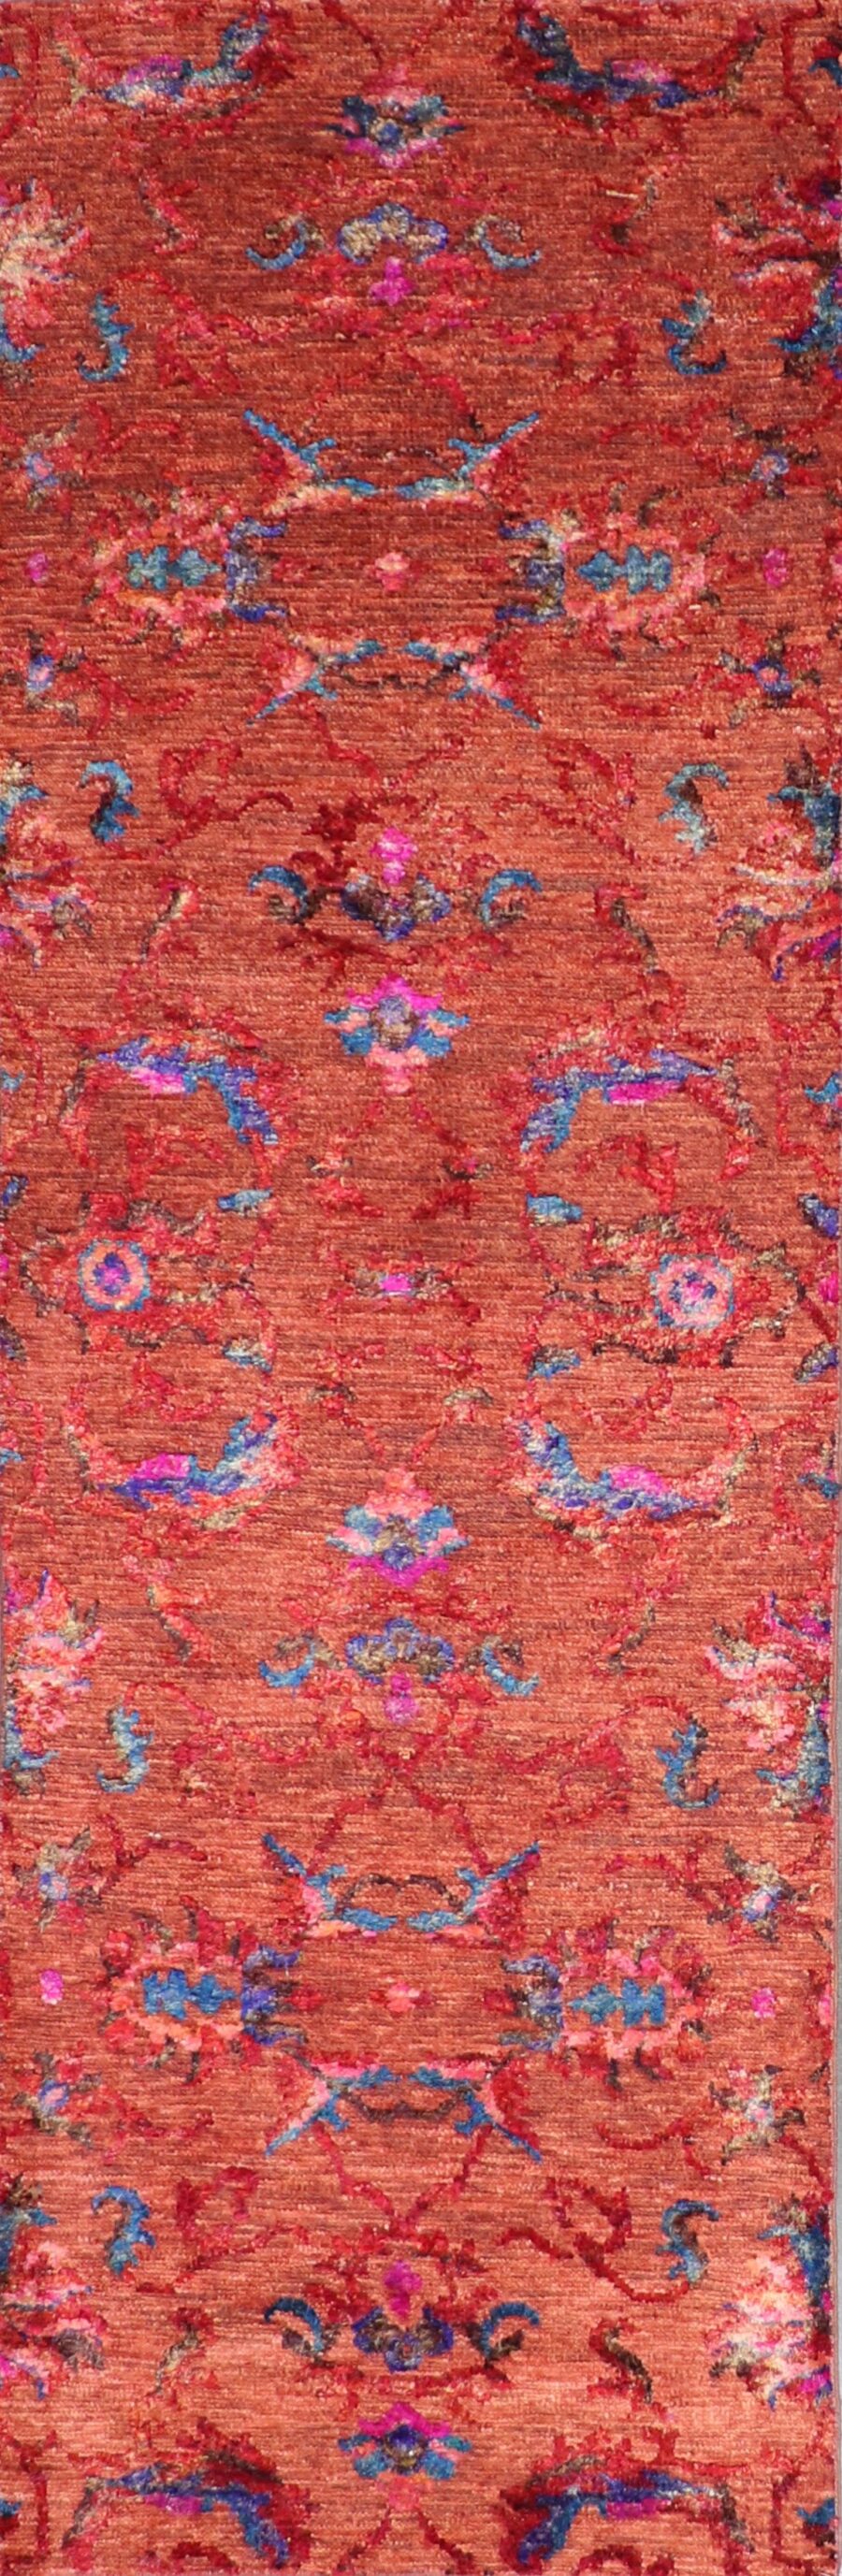 2’9”x9’10” Decorative Red & Pink Wool & Silk Hand-Knotted Rug - Direct Rug Import | Rugs in Chicago, Indiana,South Bend,Granger